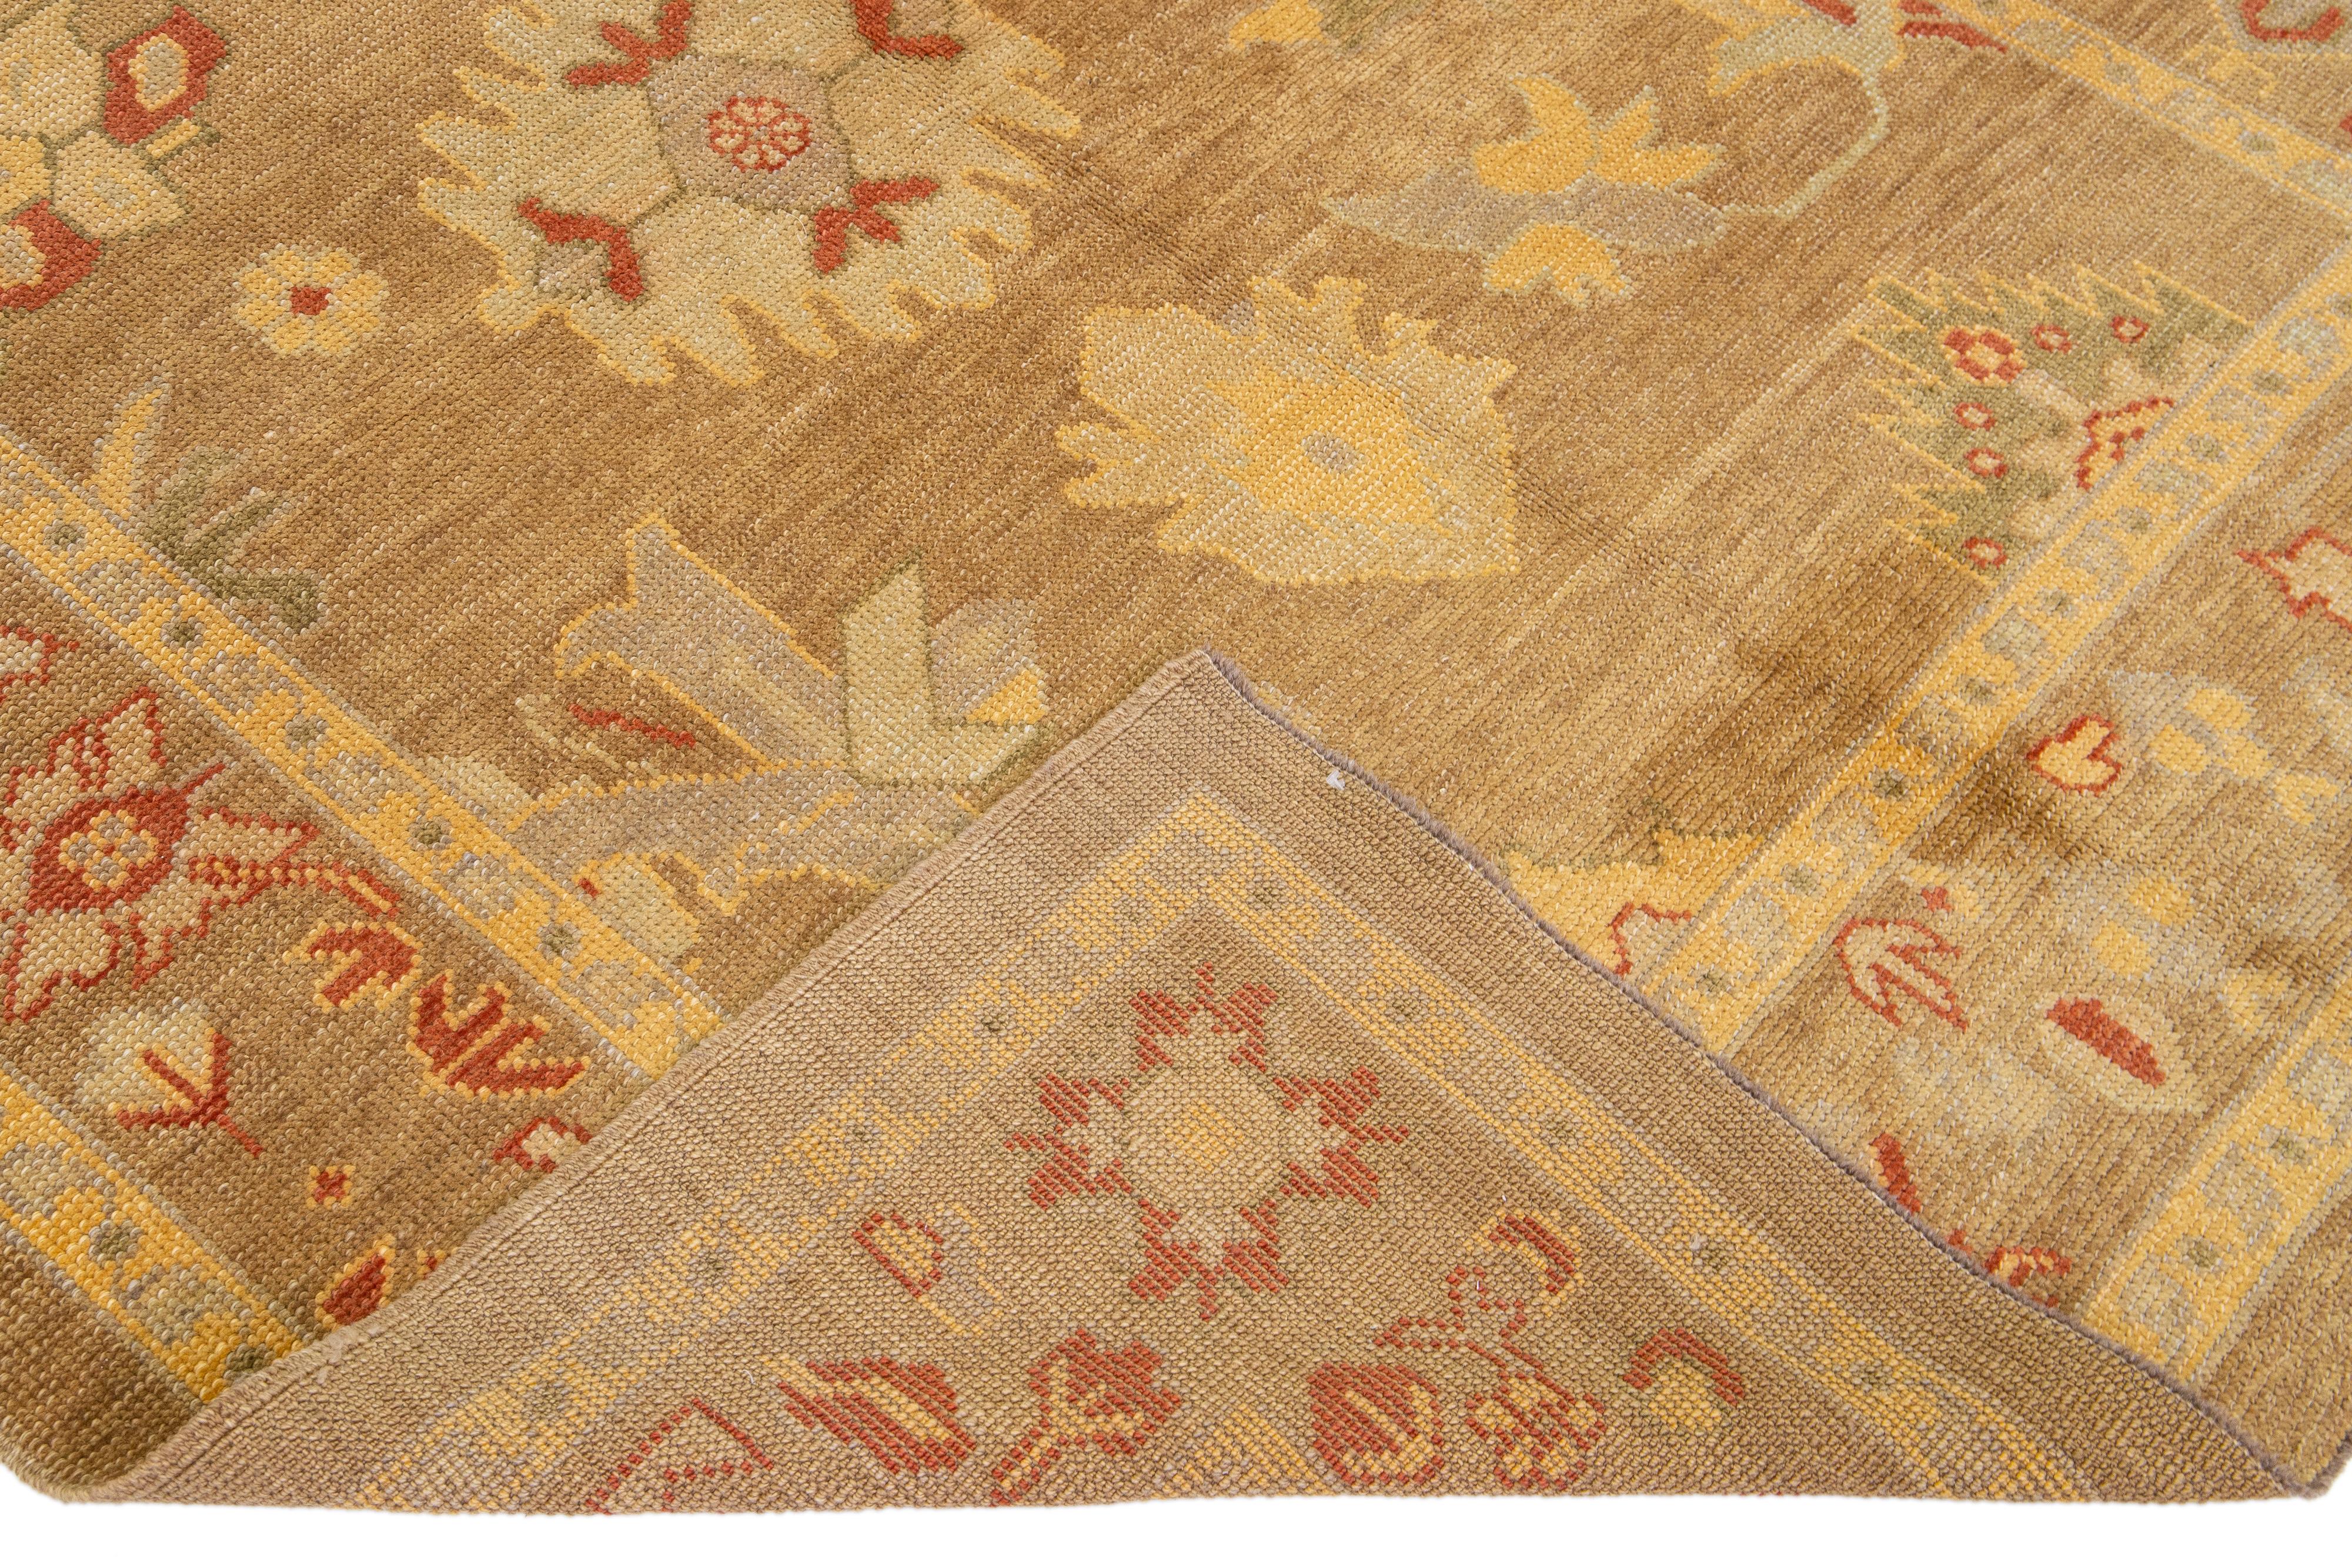 Beautiful Turkish Oushak hand-knotted wool rug with the tan field. This Turkish rug has multicolor accents in a gorgeous layout floral motif.

This rug measures: 6'3